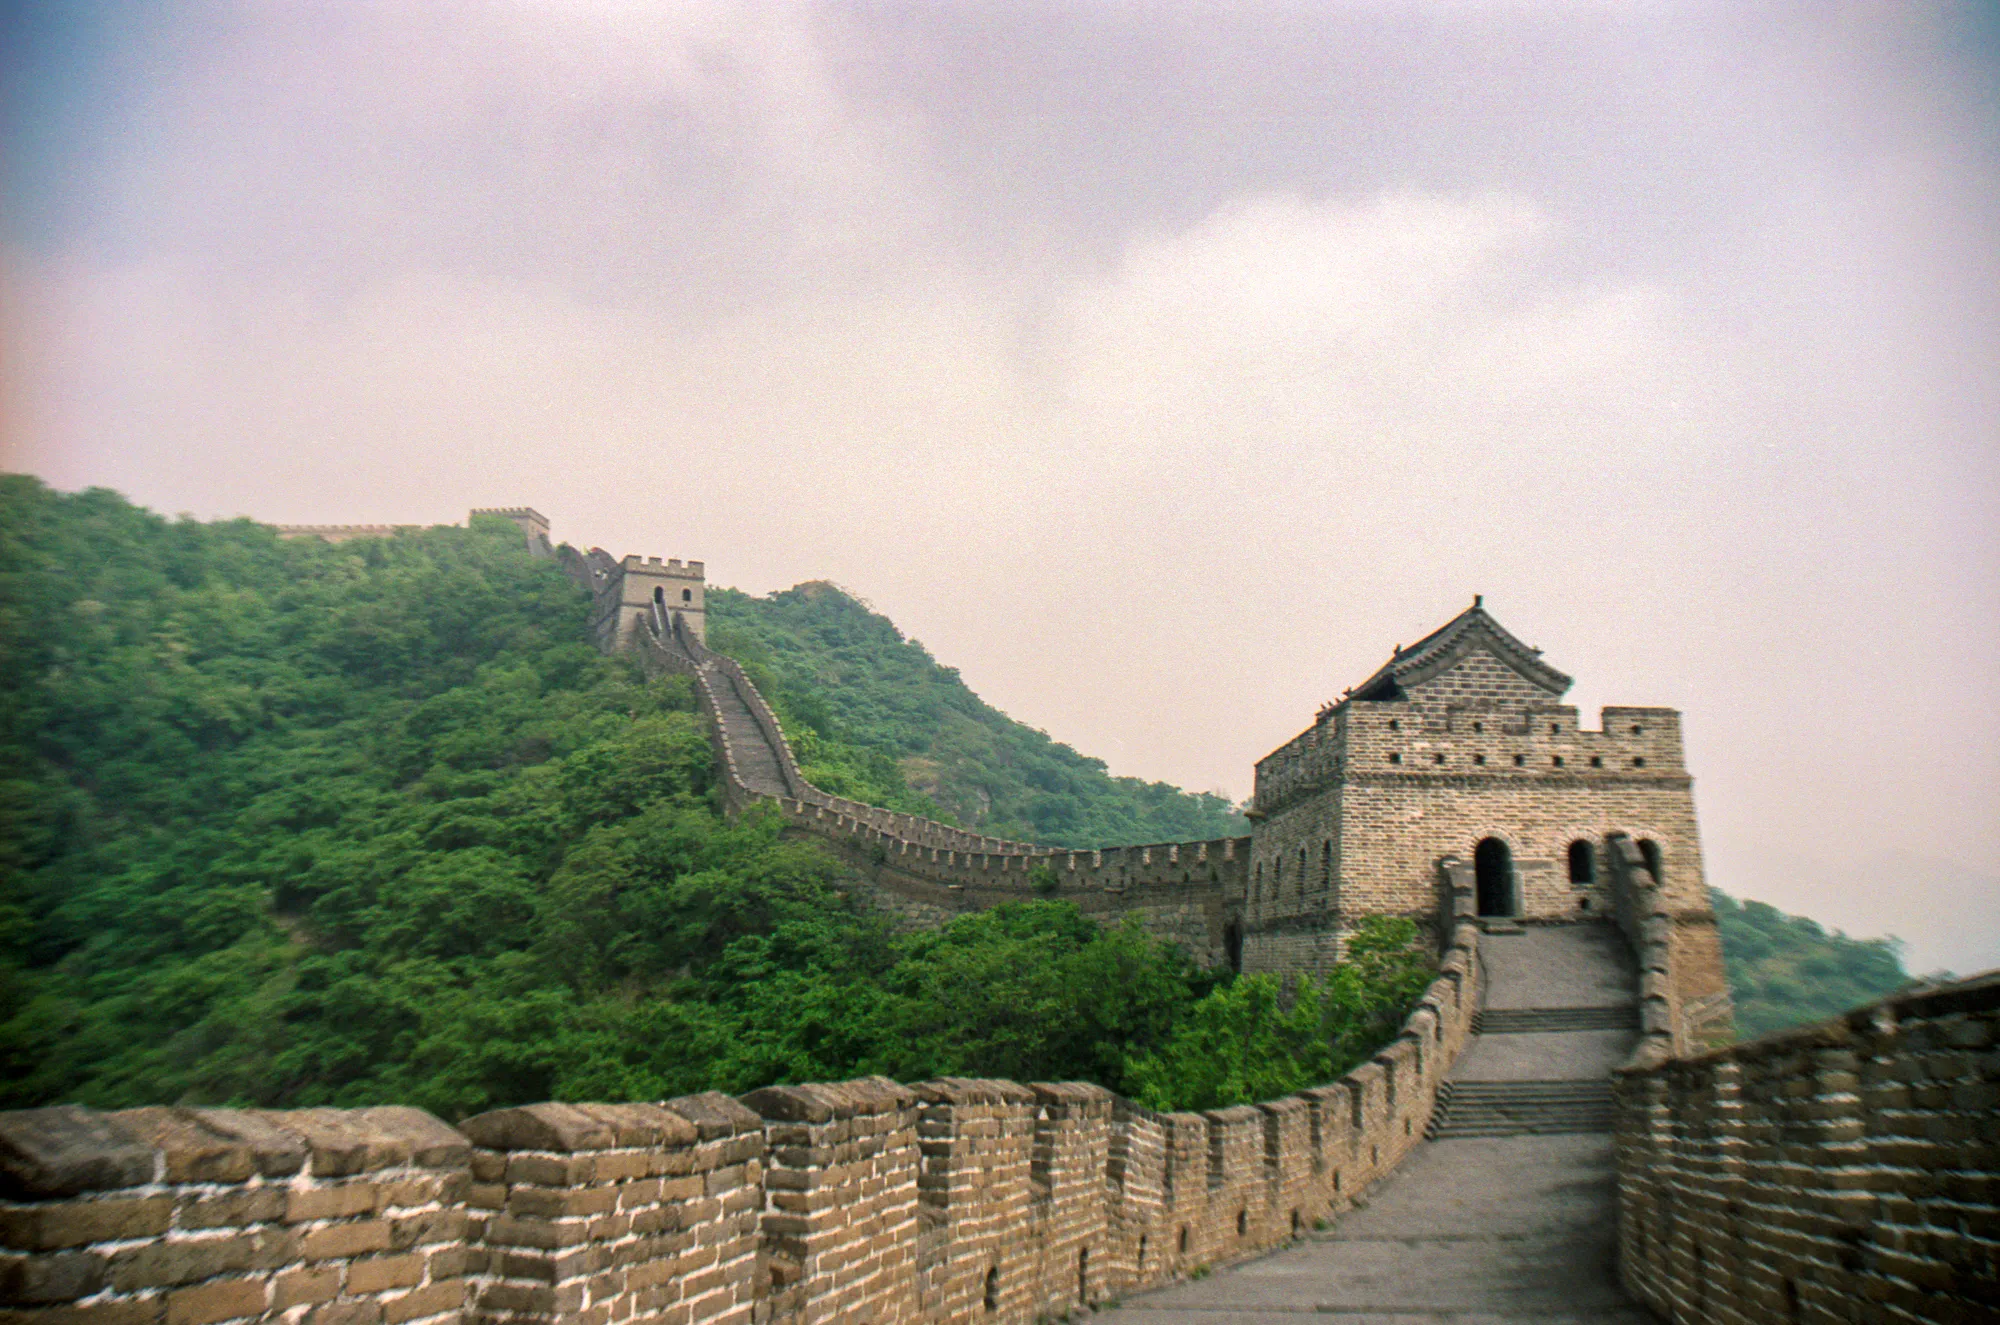 Looking up the Great Wall